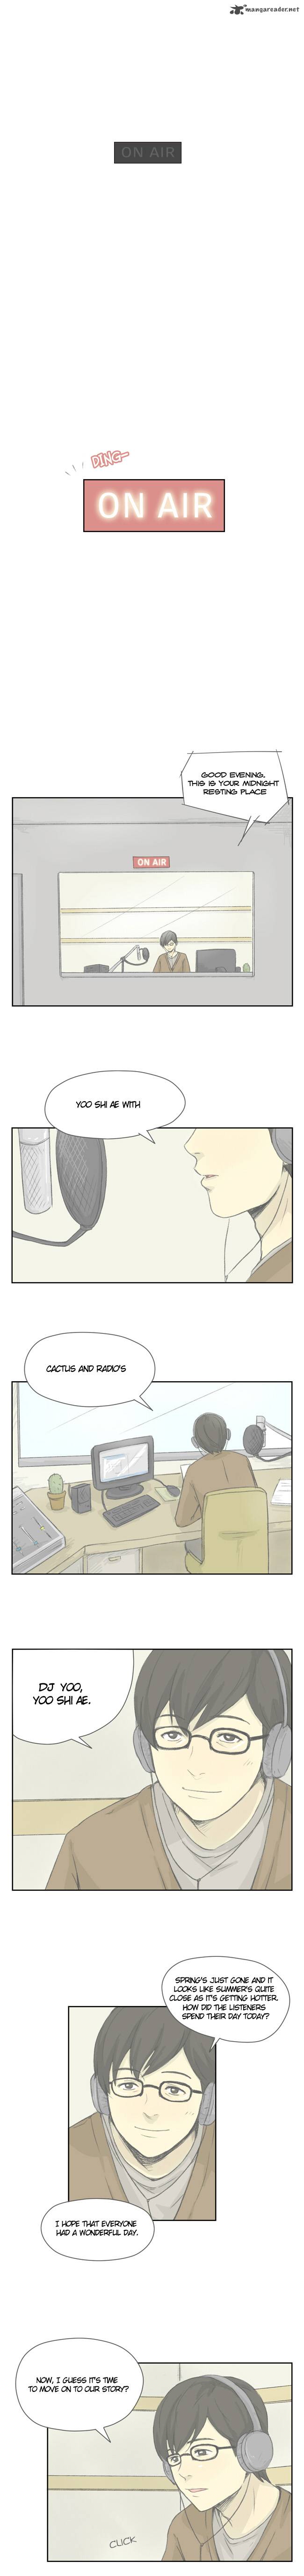 Cactus And Radio Chapter 1 Page 1